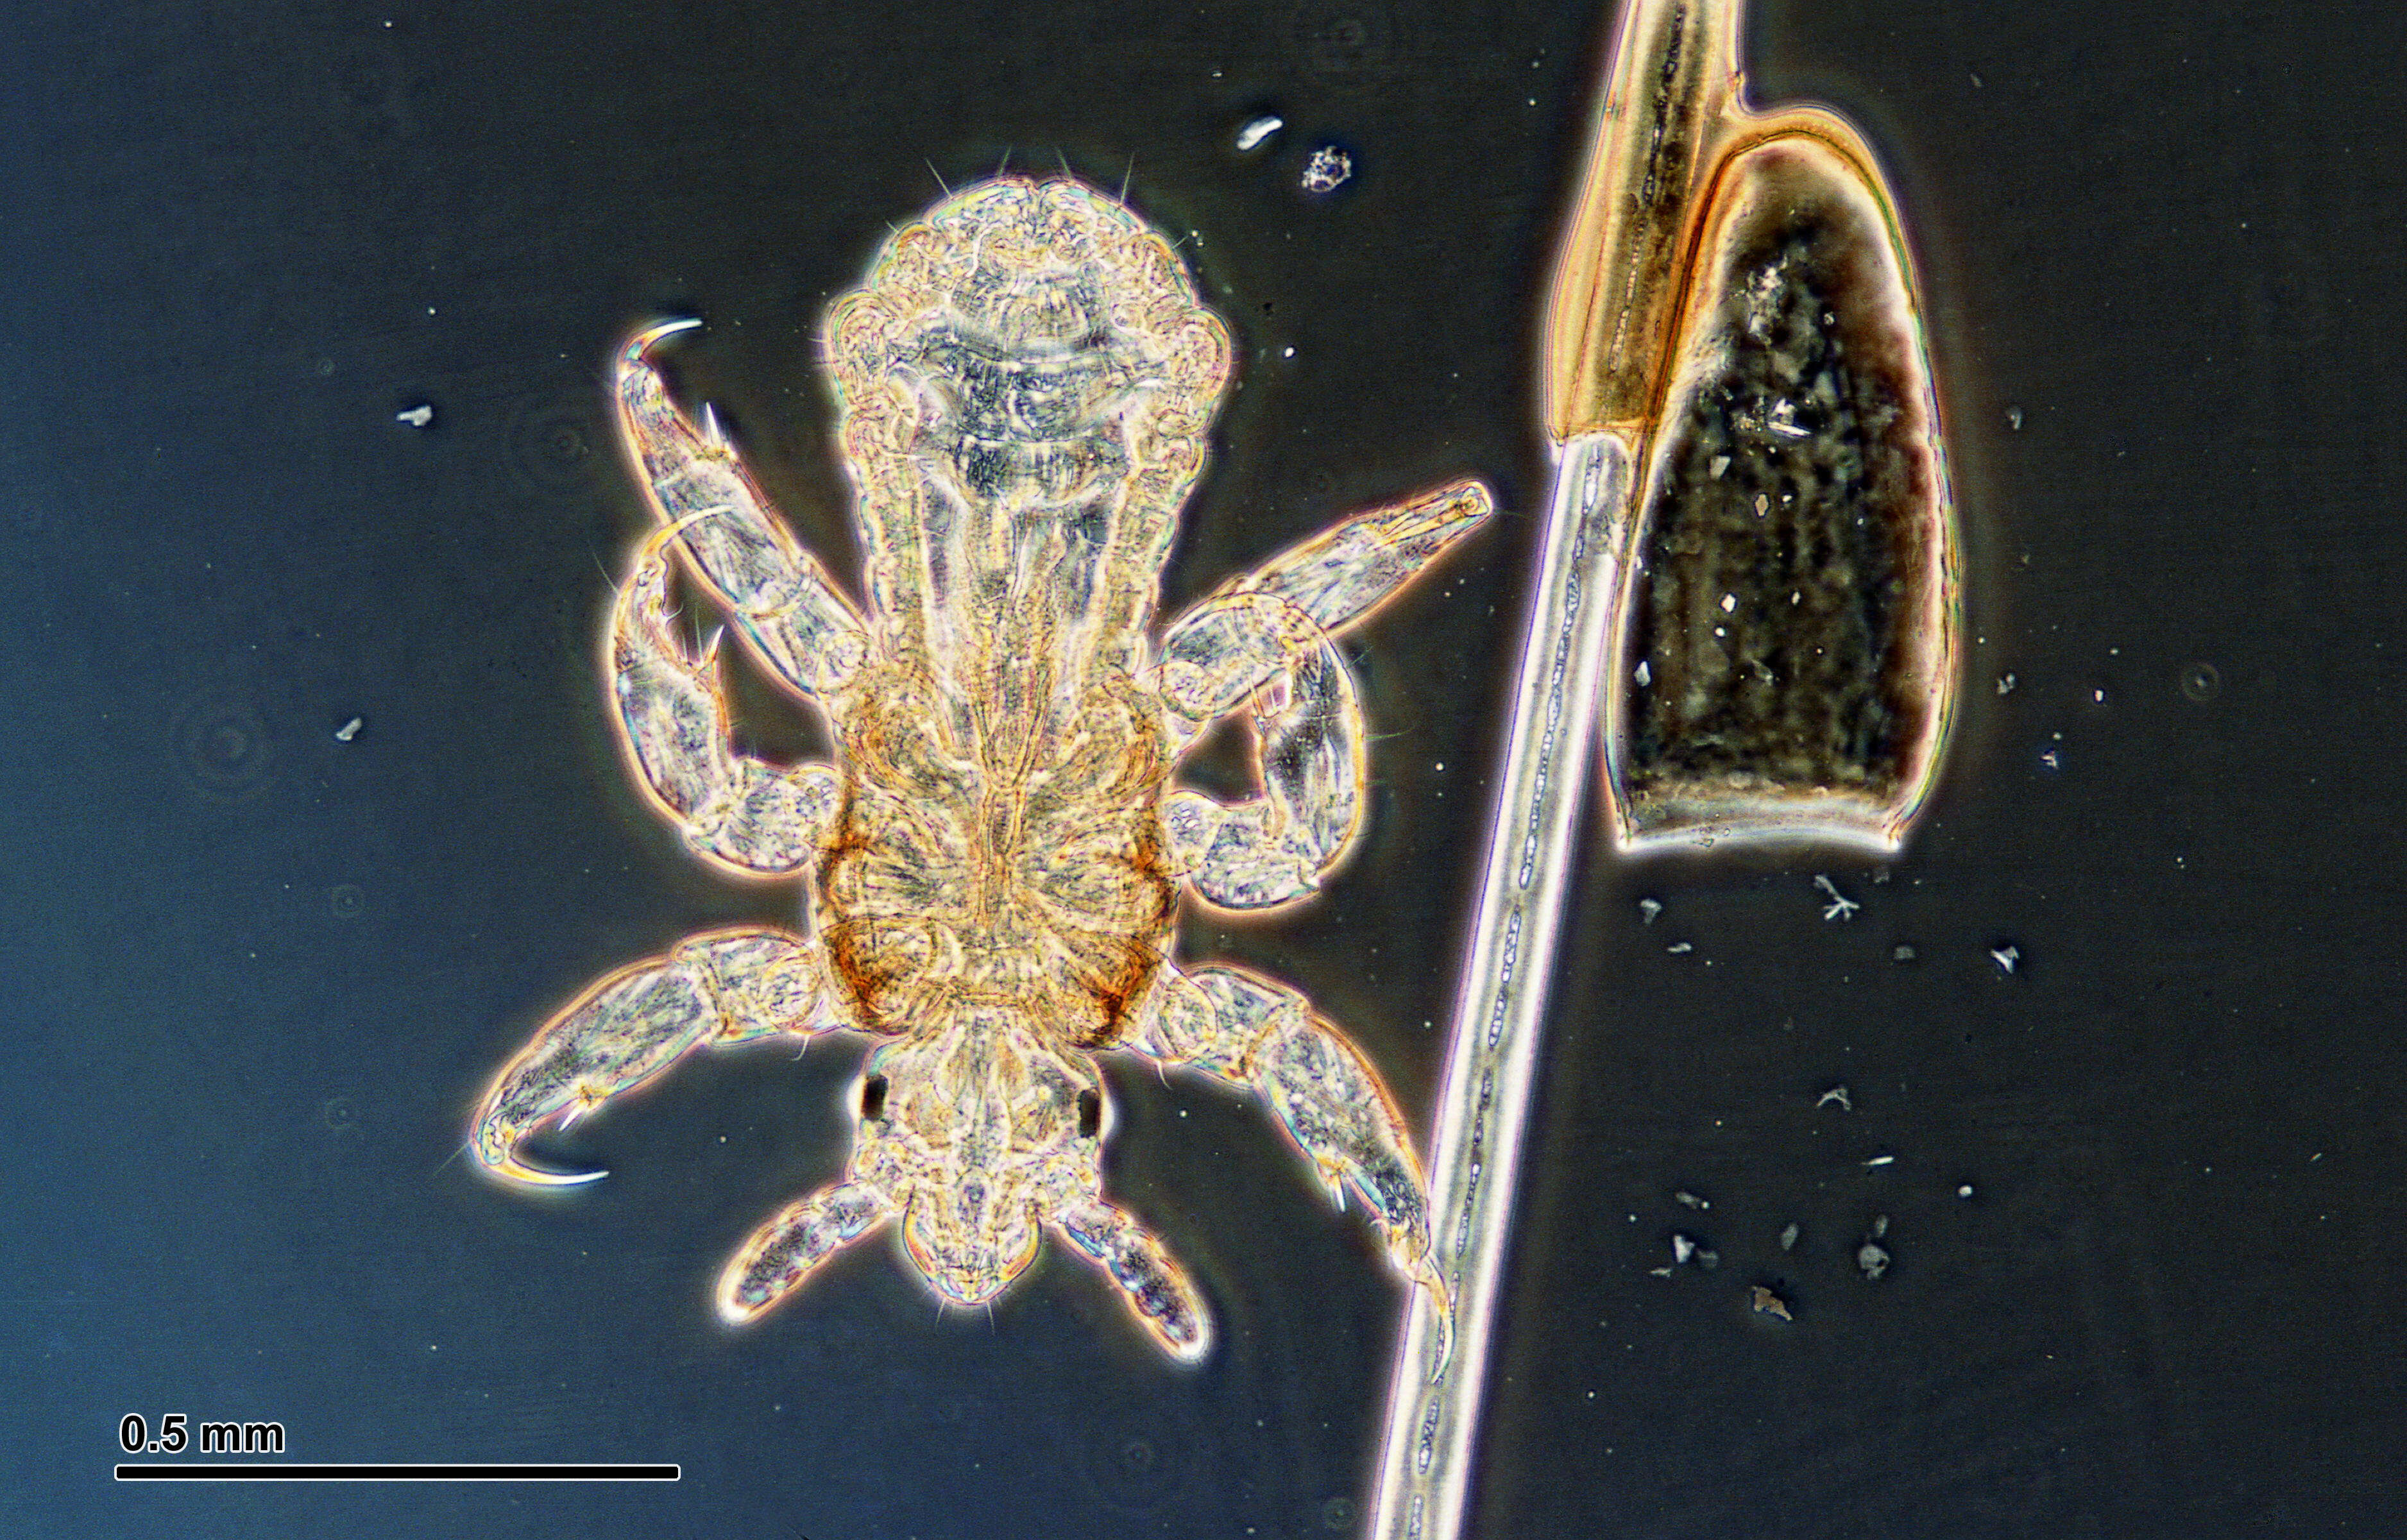 Image of pubic lice